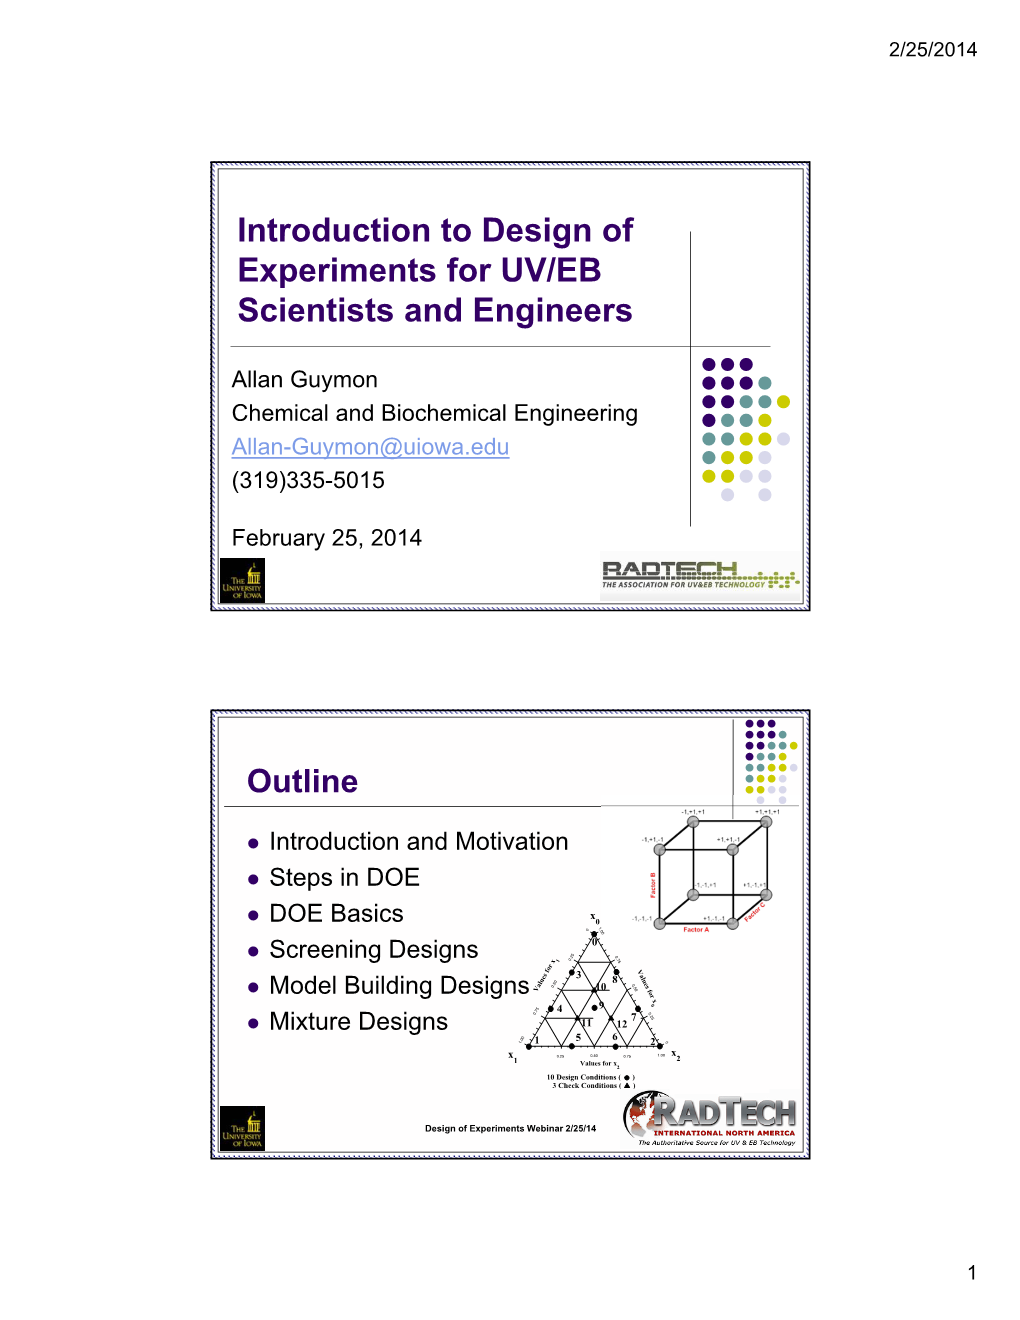 Introduction to Design of Experiments for UV/EB Scientists and Engineers